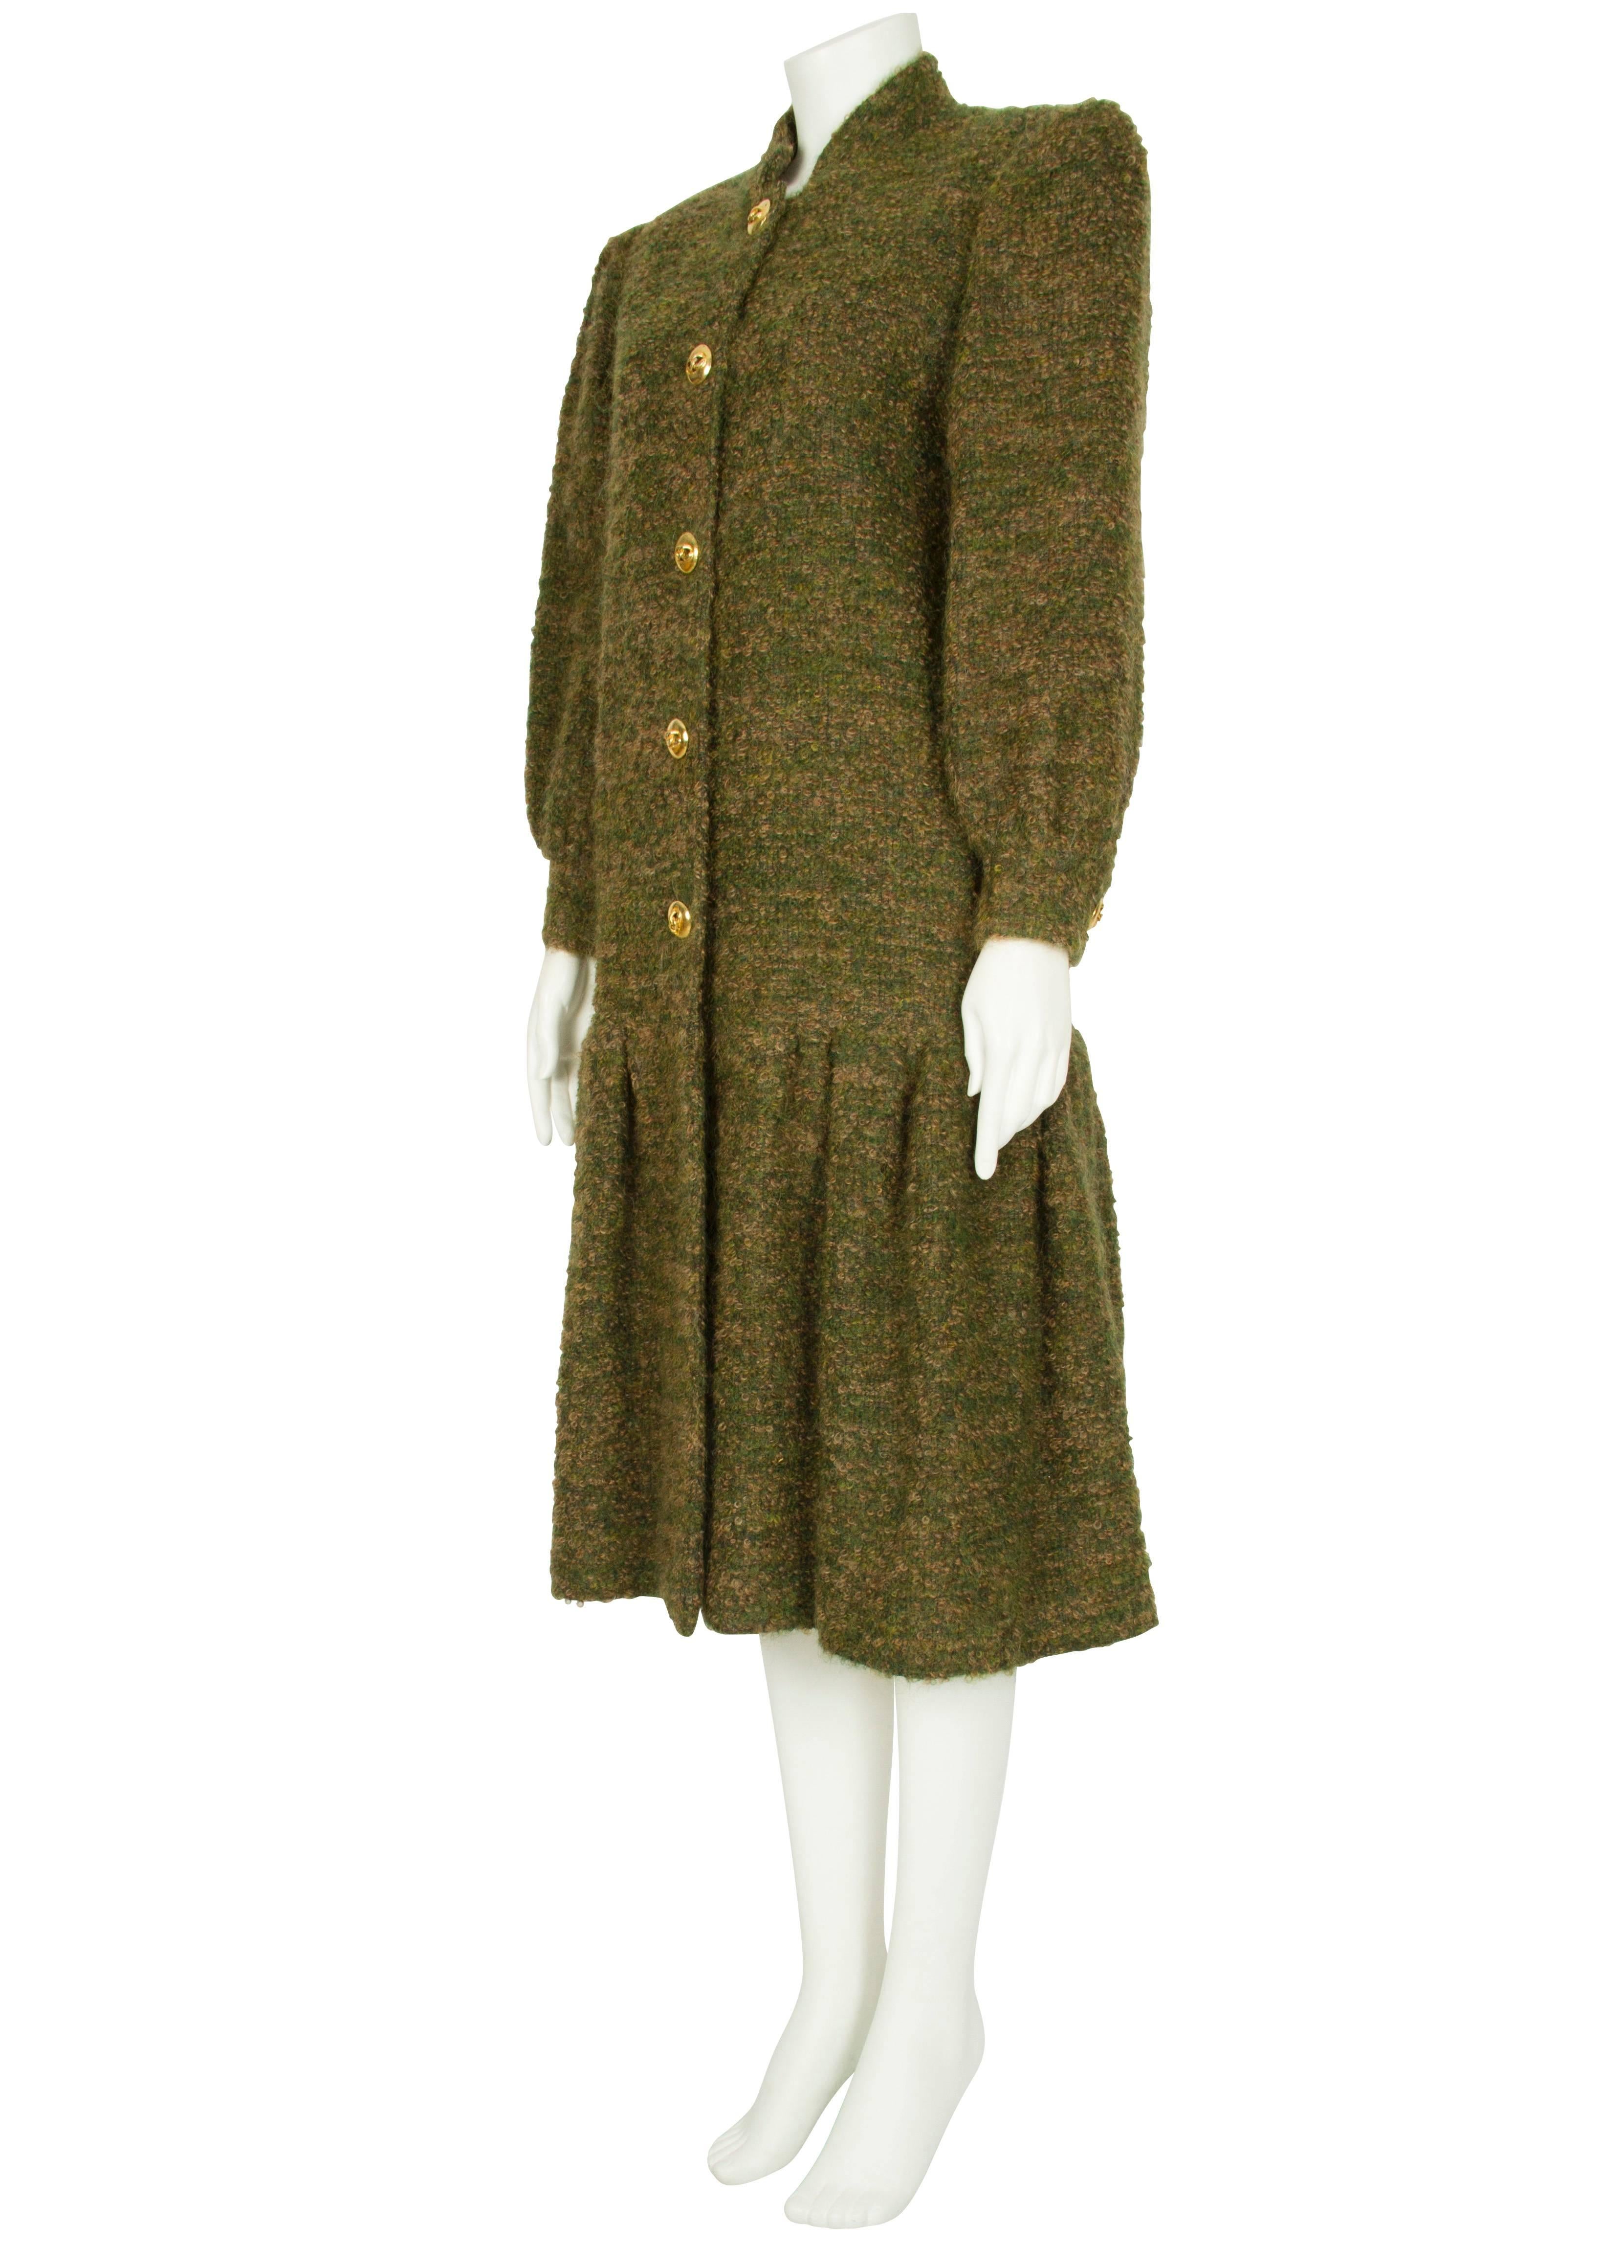 An elegant olive green and camel brown boucle wool coat by London society couturier Harald. The textured coat features a small high notched collar, gathered shoulders, three-quarter-length leg-o’-mutton sleeves with fitted cuffs and a light brown